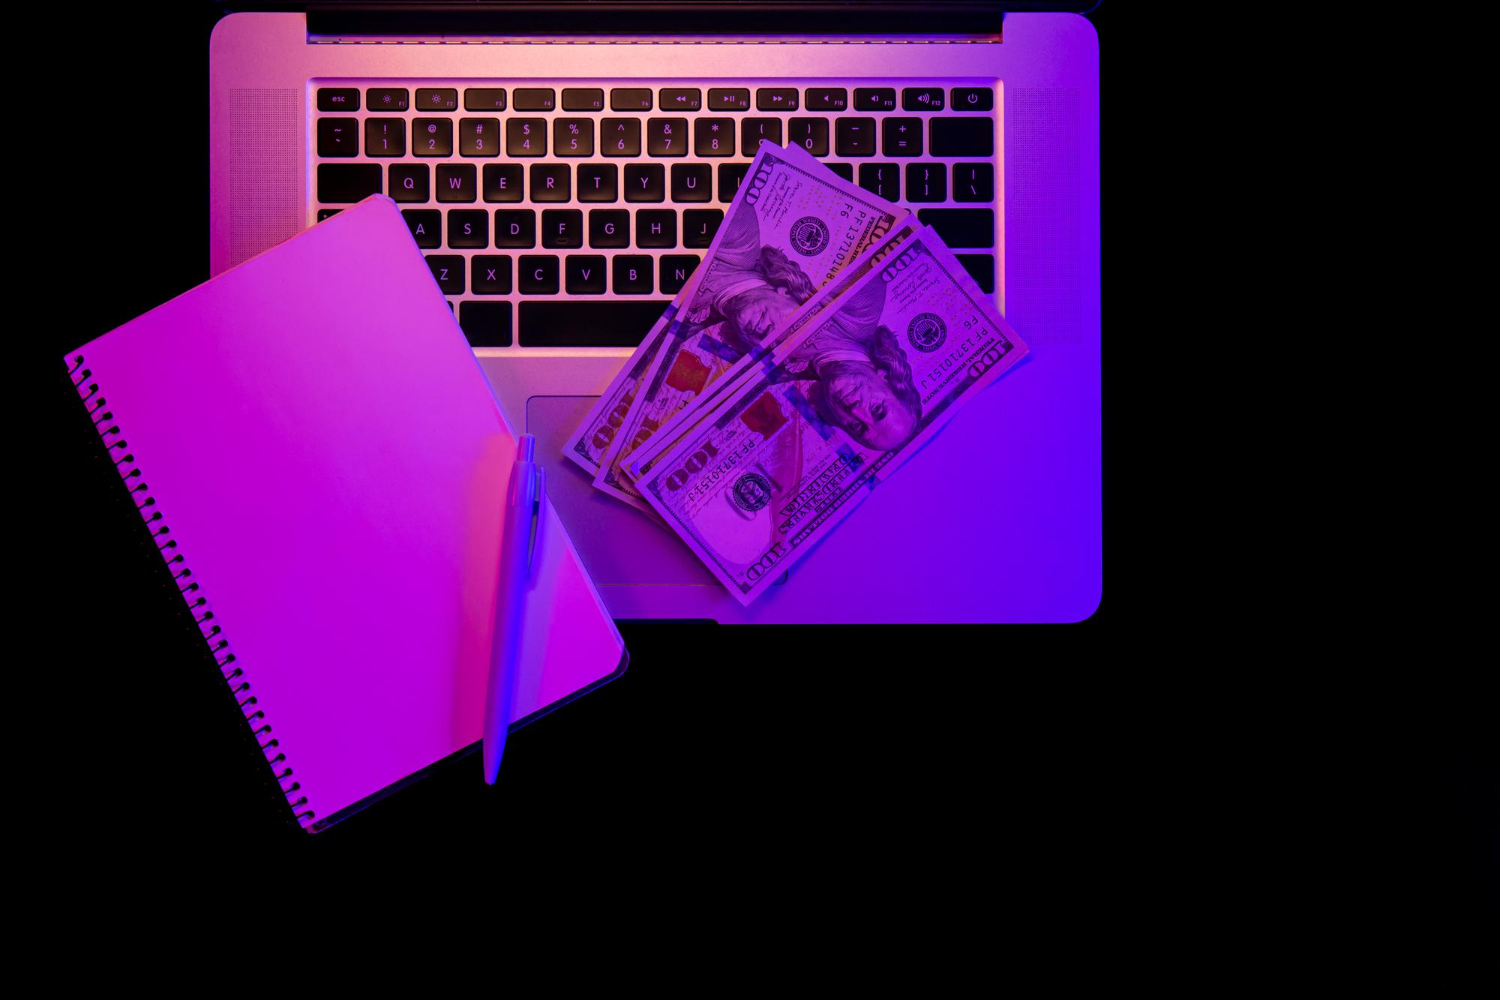 Laptop with a blank notepad and 100 dollar bills on top under neon light